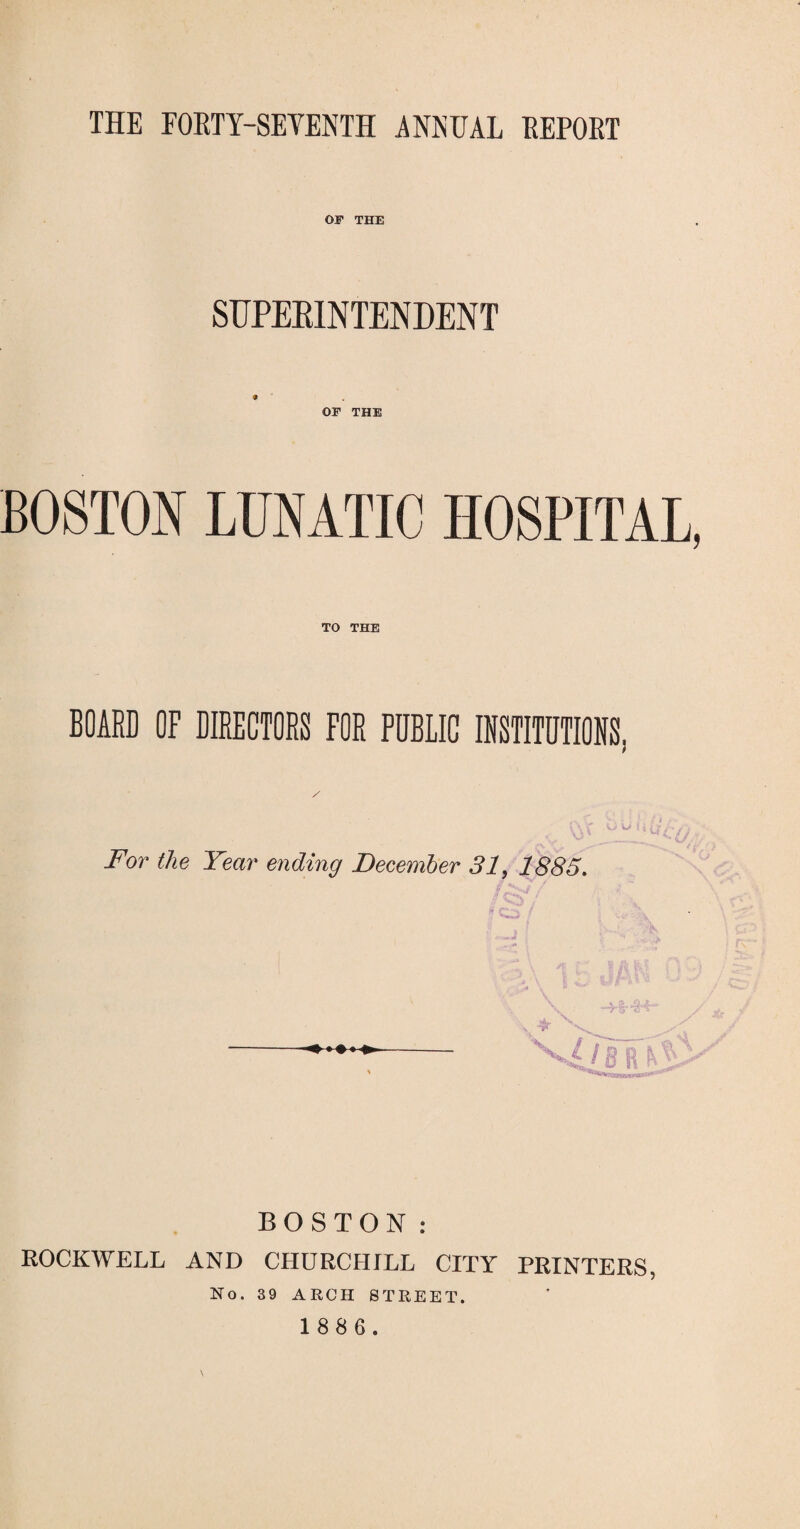 THE FOETY-SEYENTH ANNUAL EEPORT OF THE SUPERINTENDENT * OF THE BOSTON LUNATIC HOSPITAL, TO THE BOARD OF DIRECTORS FOR PDBLIC INSTITUTIONS, For the Year ending December 31, 1885. / 8 BOSTON: ROCKWELL AND CHURCHILL CITY PRINTERS, No. 39 ARCH STREET.